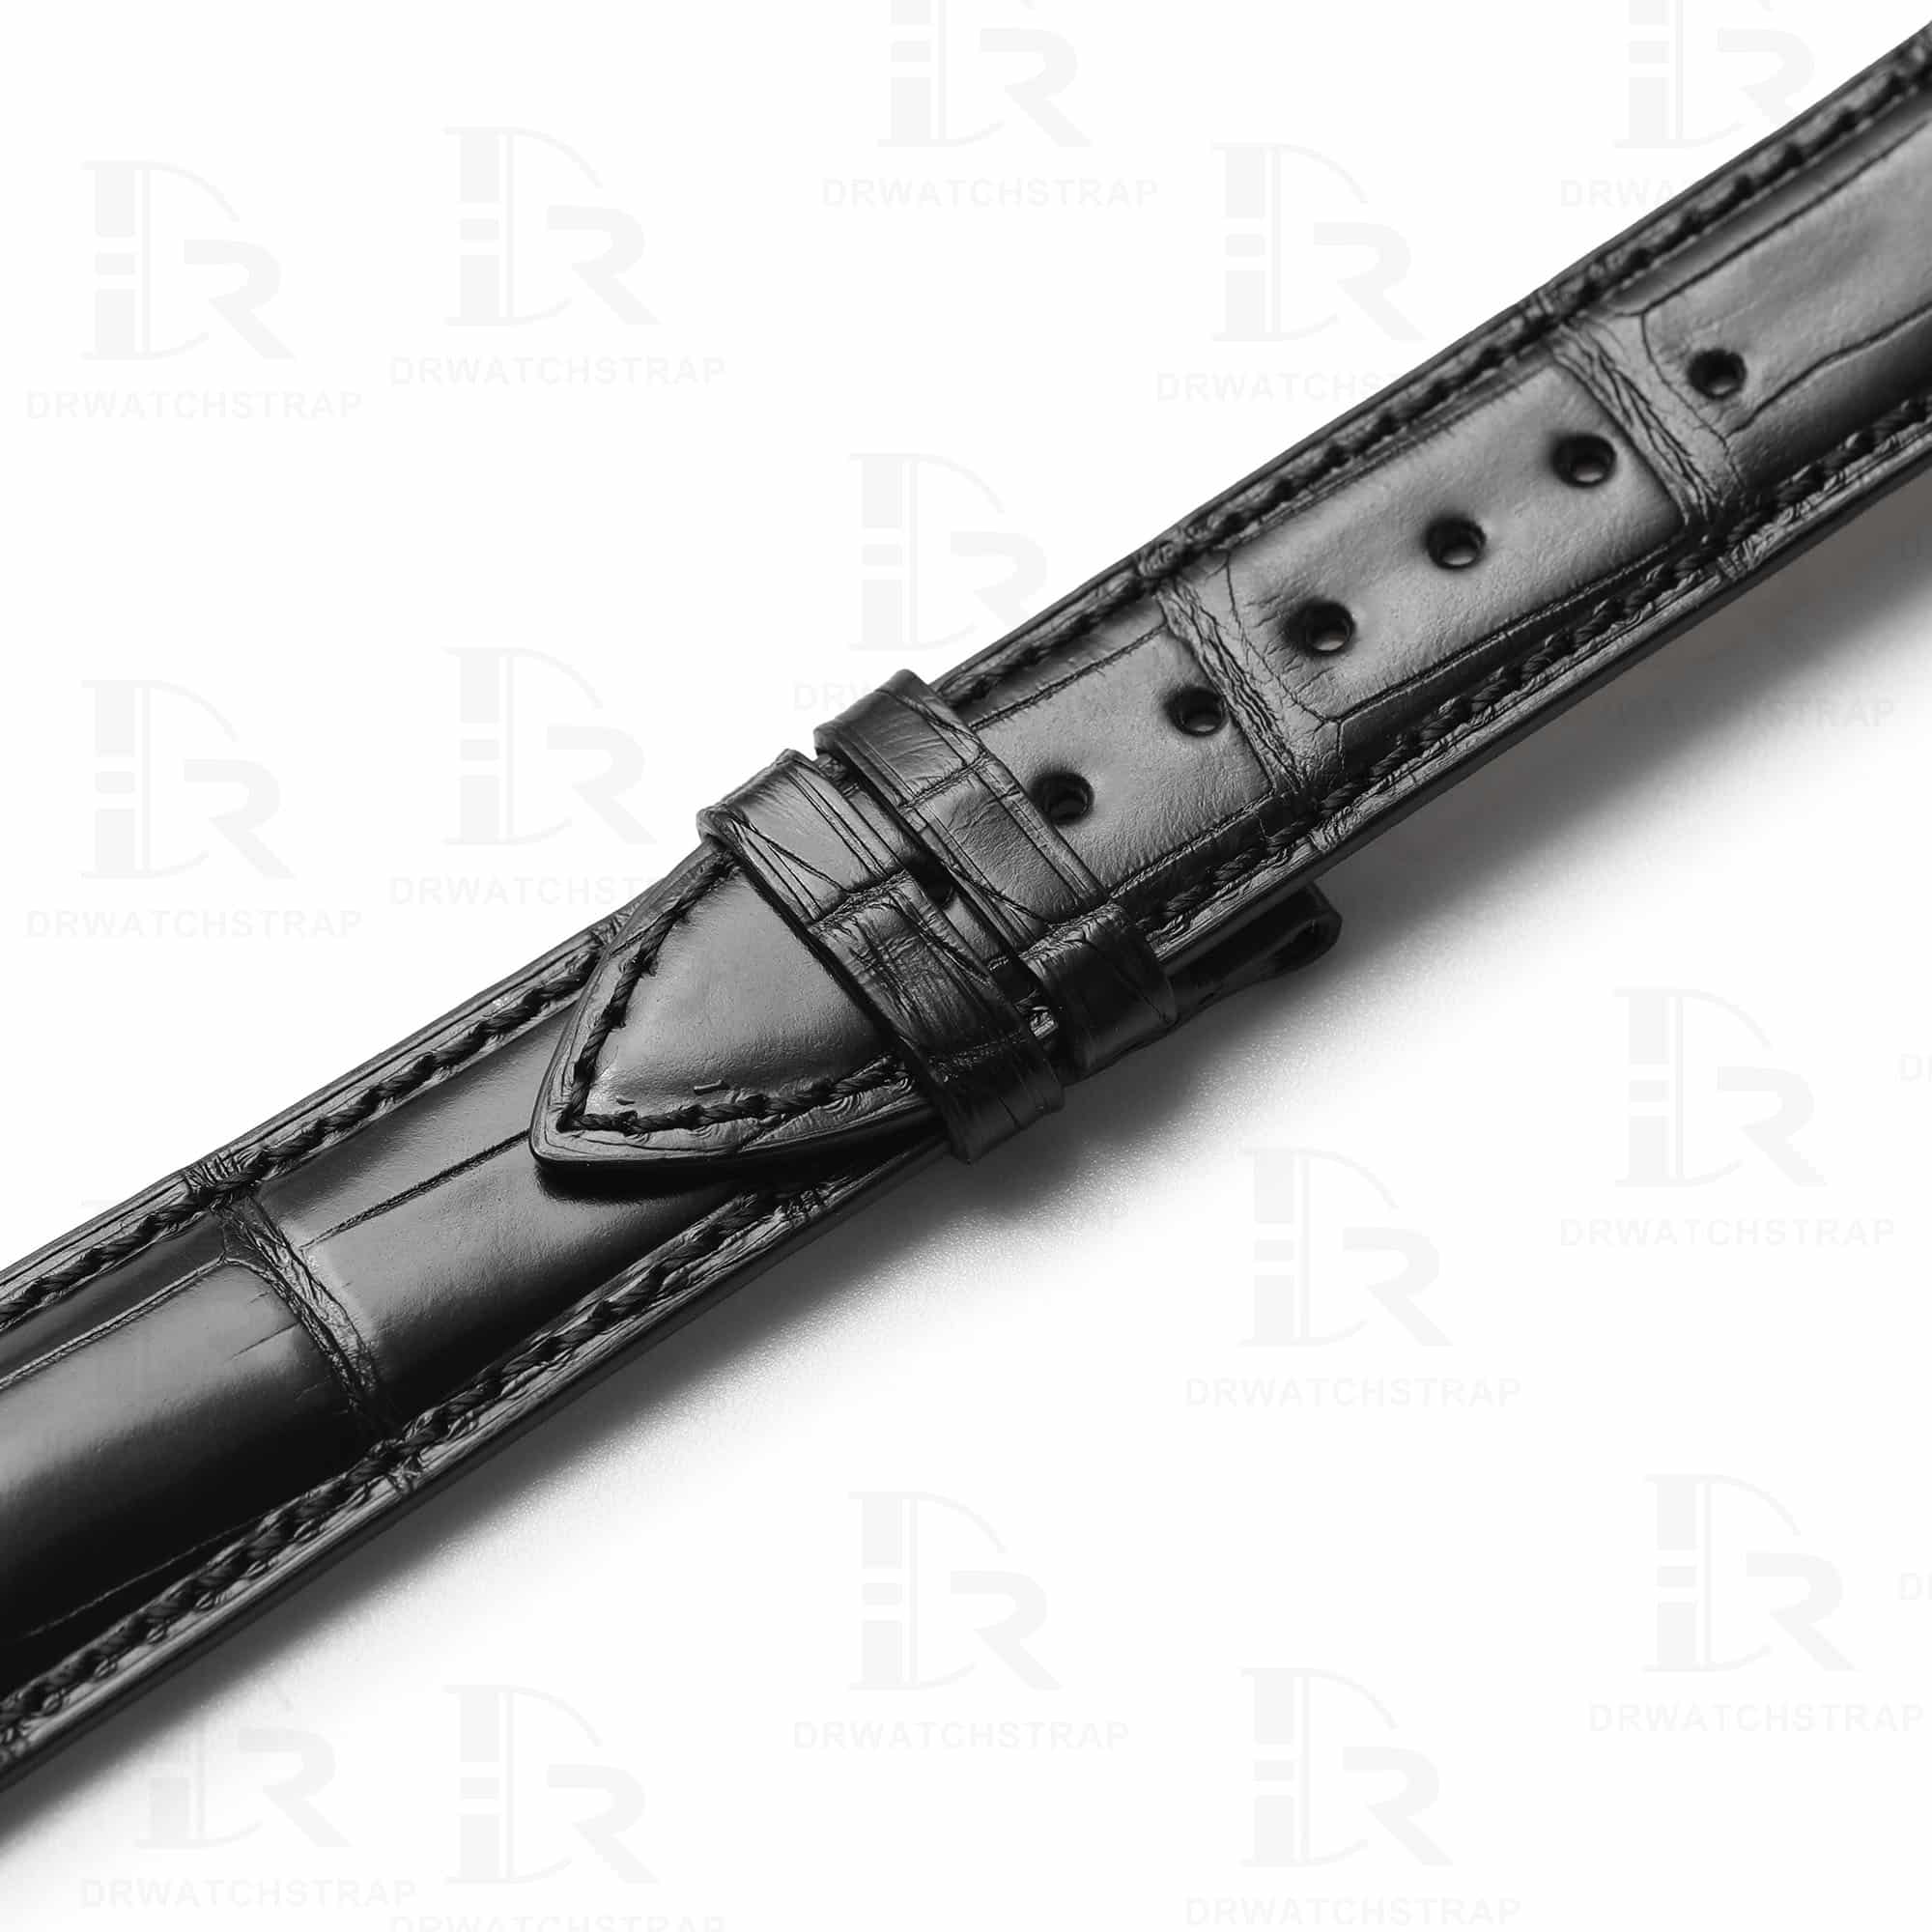 Flexible loops of the Genuine leather watch band